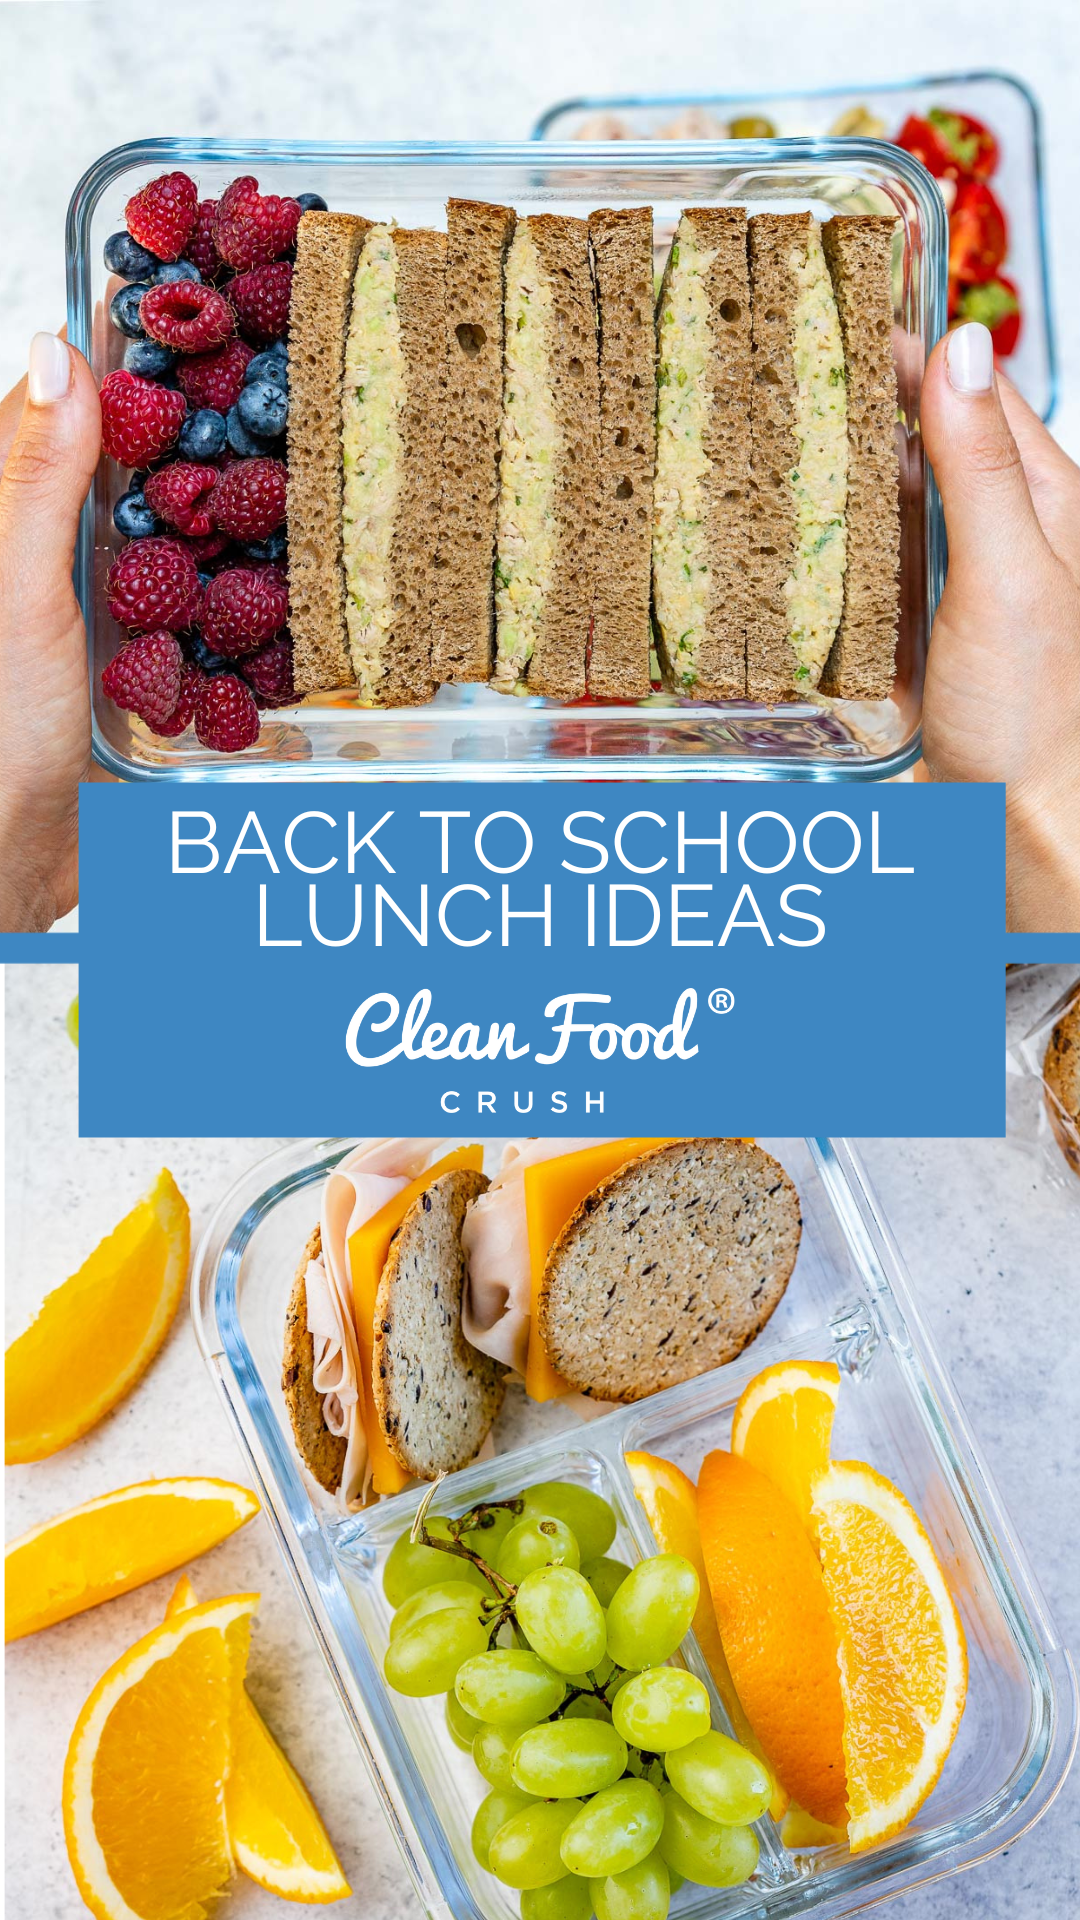 https://cleanfoodcrush.com/wp-content/uploads/2022/08/clean-Cold-Lunchbox-Ideas-for-Back-to-School.png